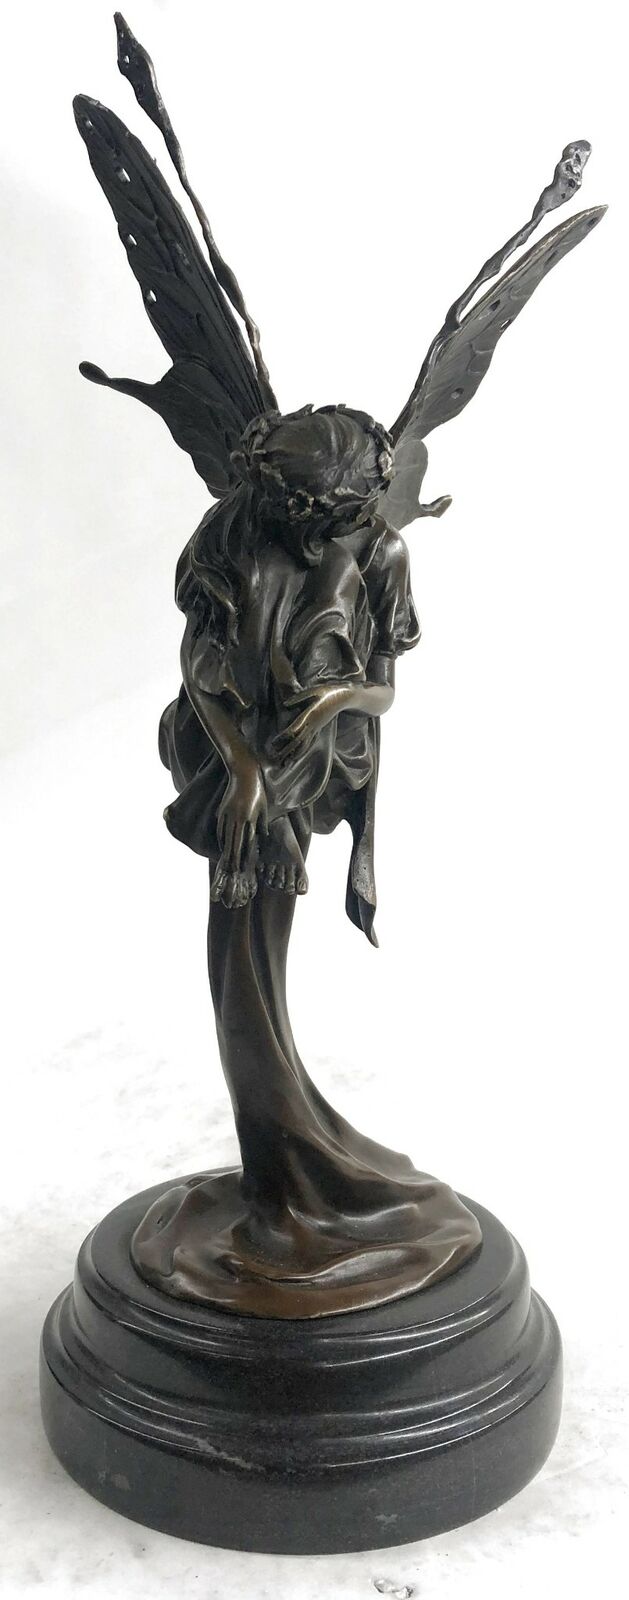 Mythical Bronze Fairy Angel Sculpture by French Artist Cesaro Figurine Sale